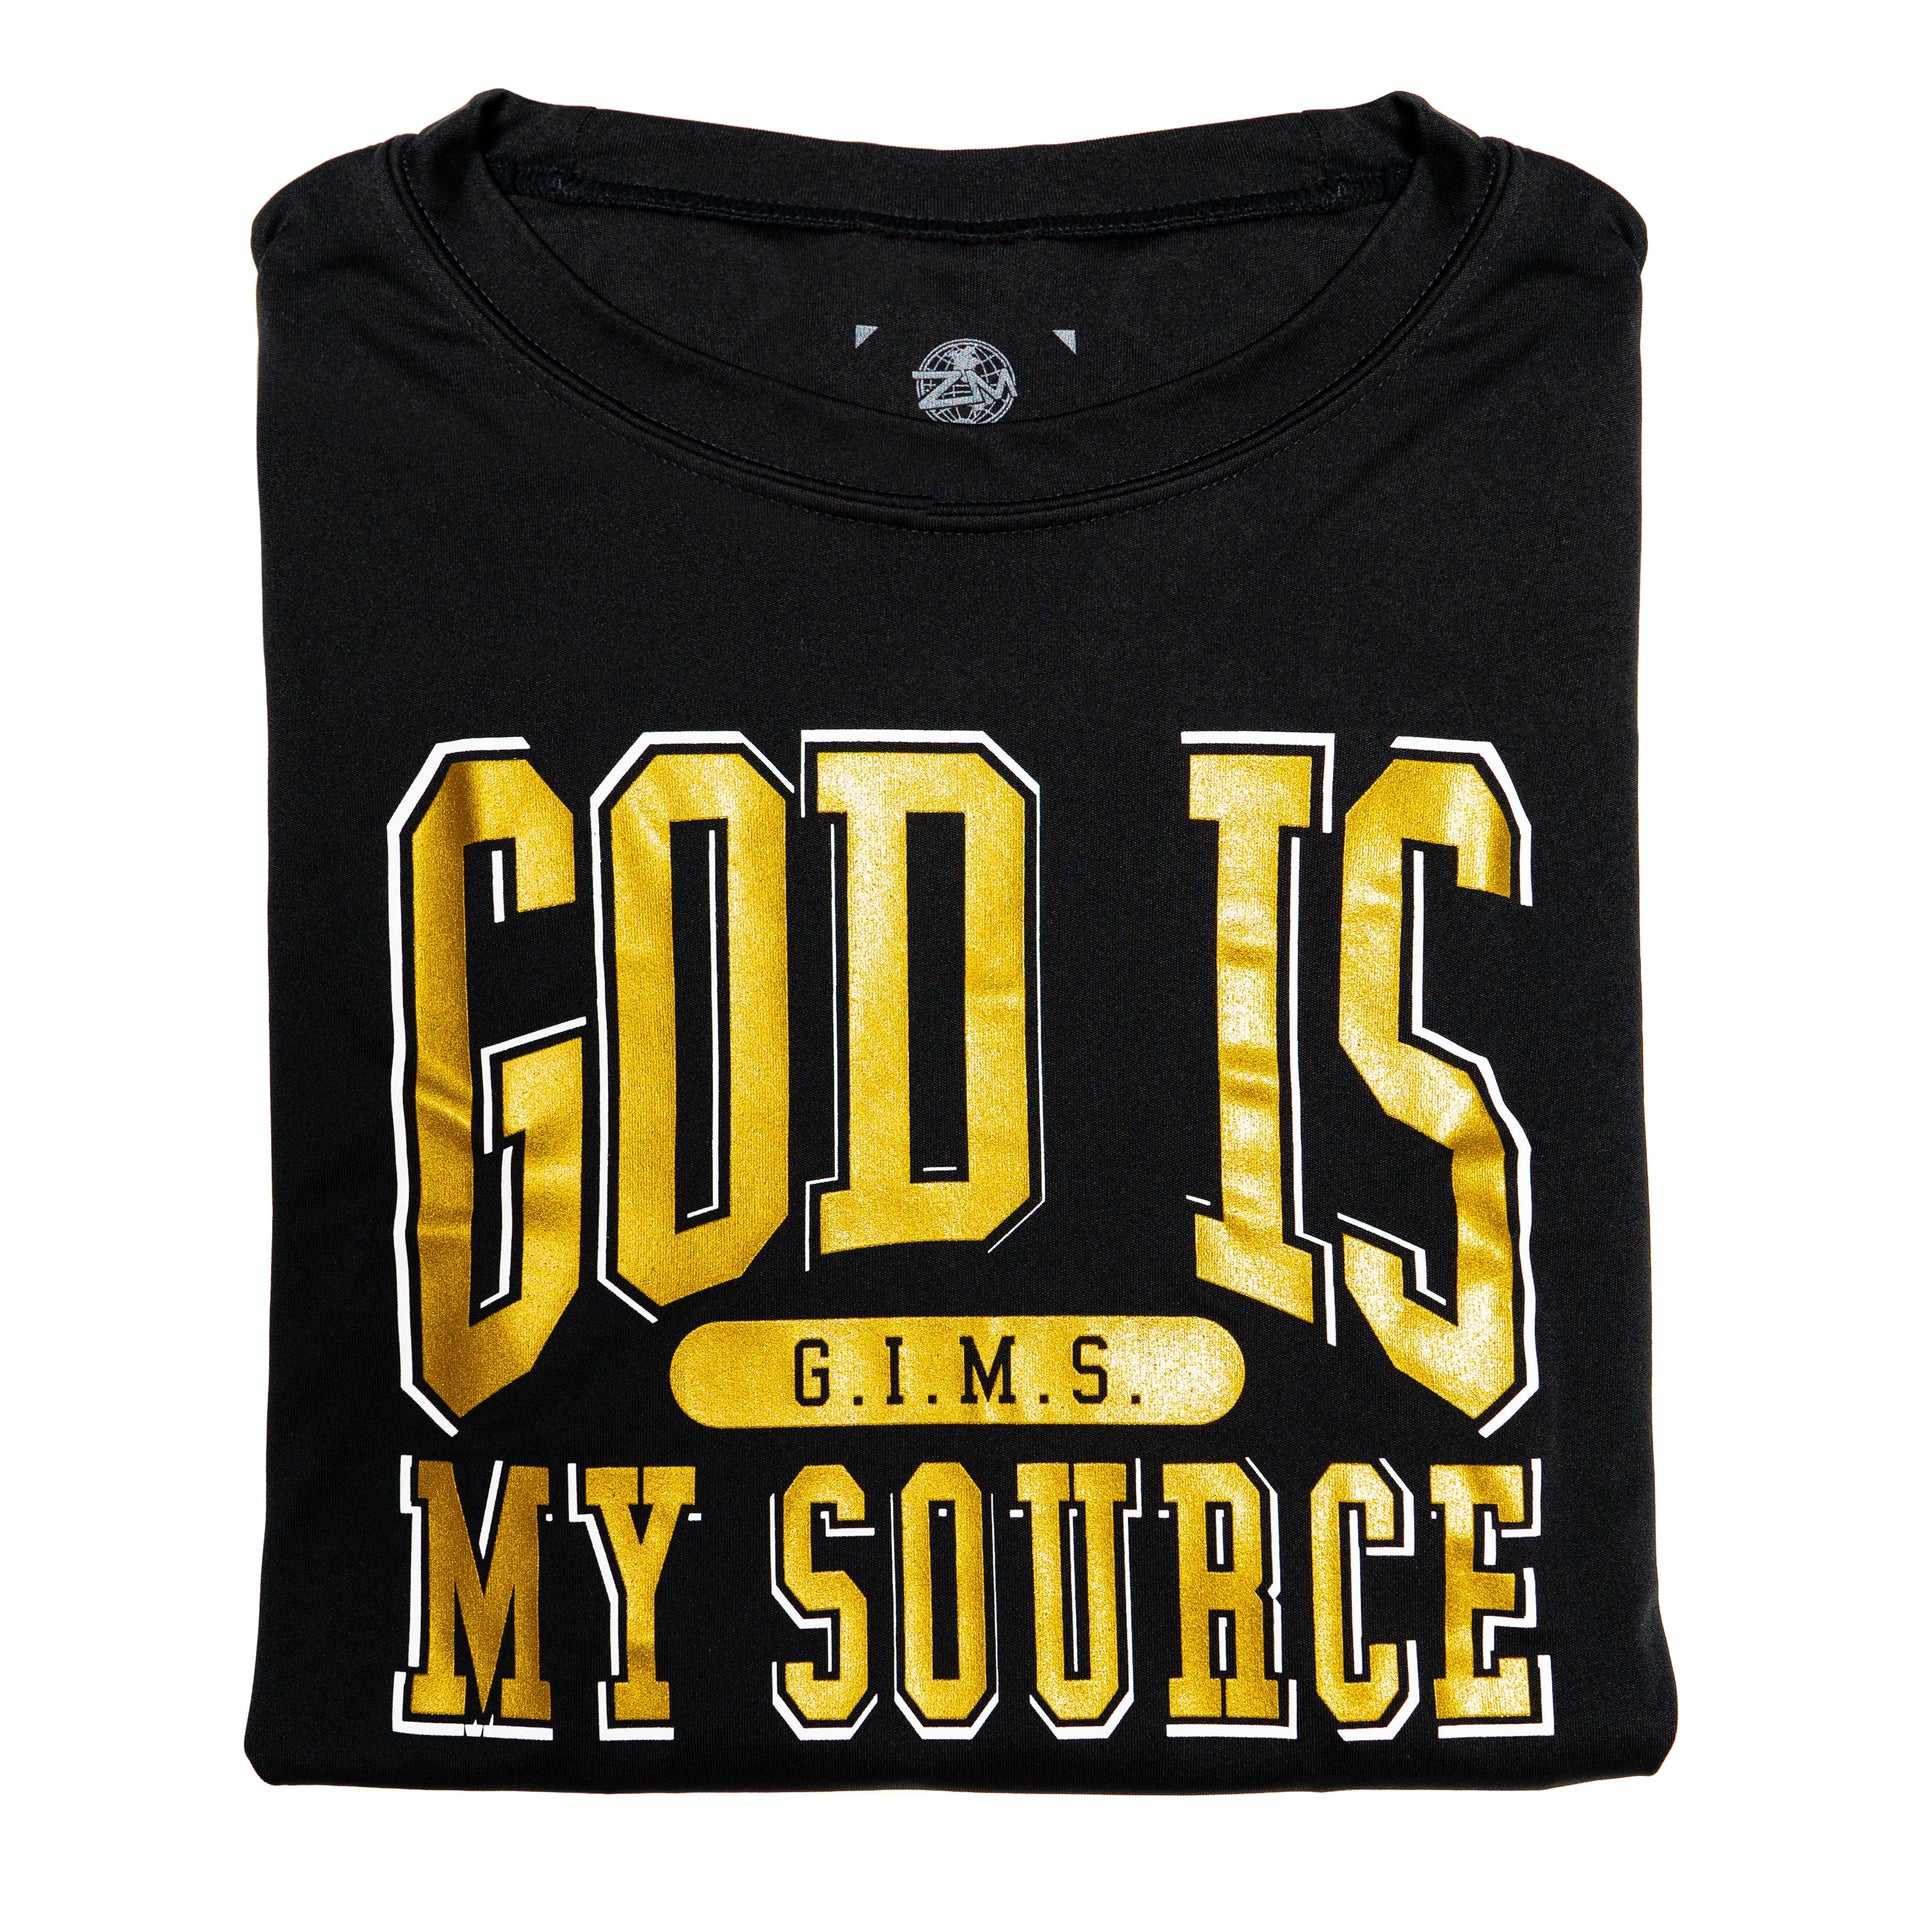 God Is My Source 'Campus' Active LS Black / Gold - God Is My Source